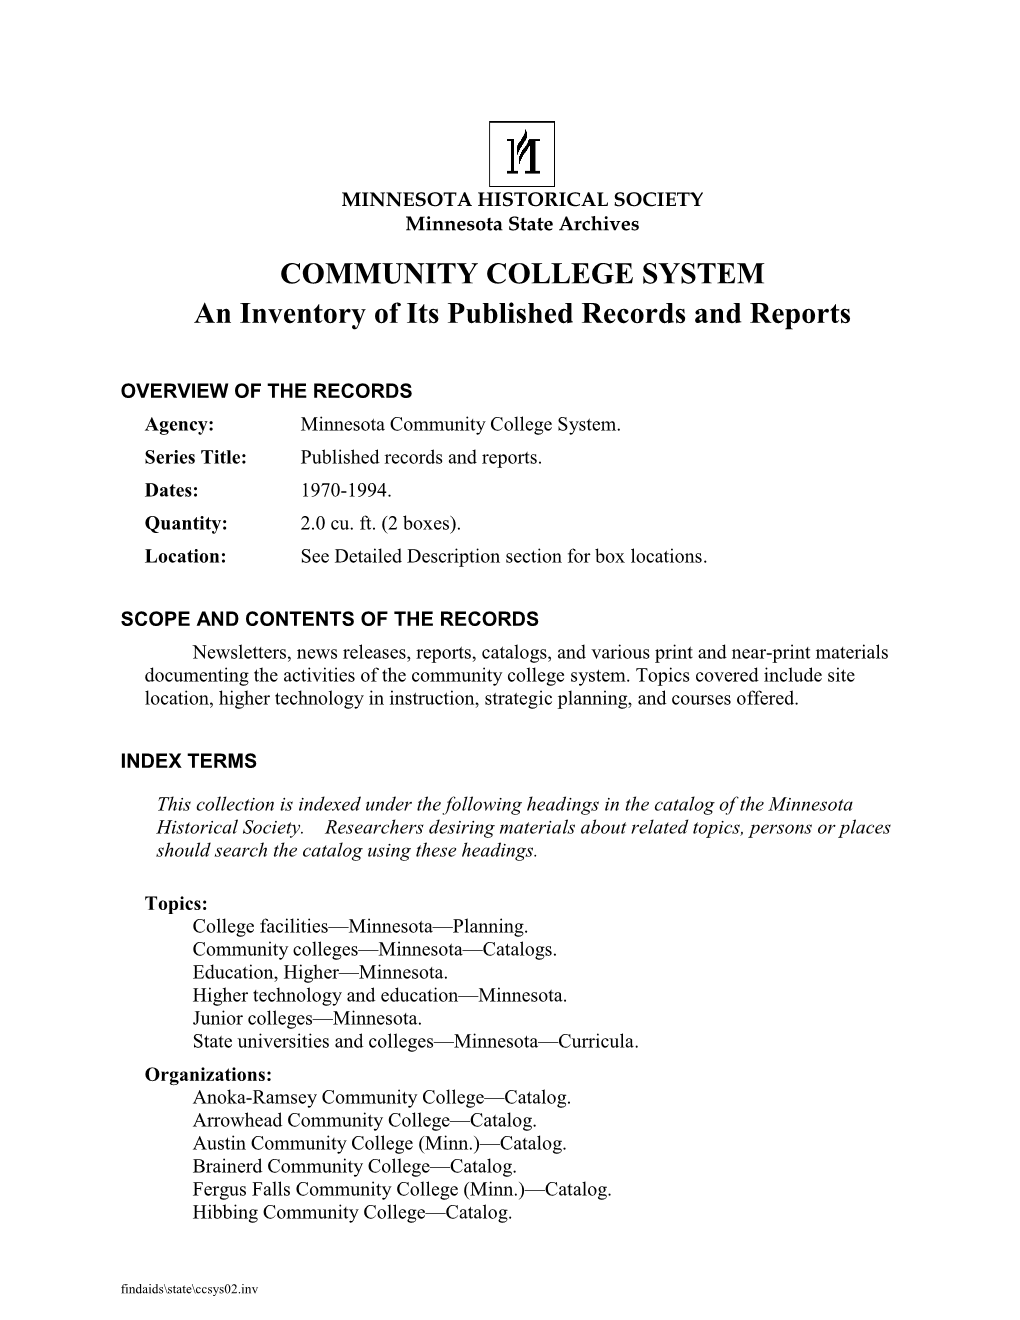 COMMUNITY COLLEGE SYSTEM an Inventory of Its Published Records and Reports